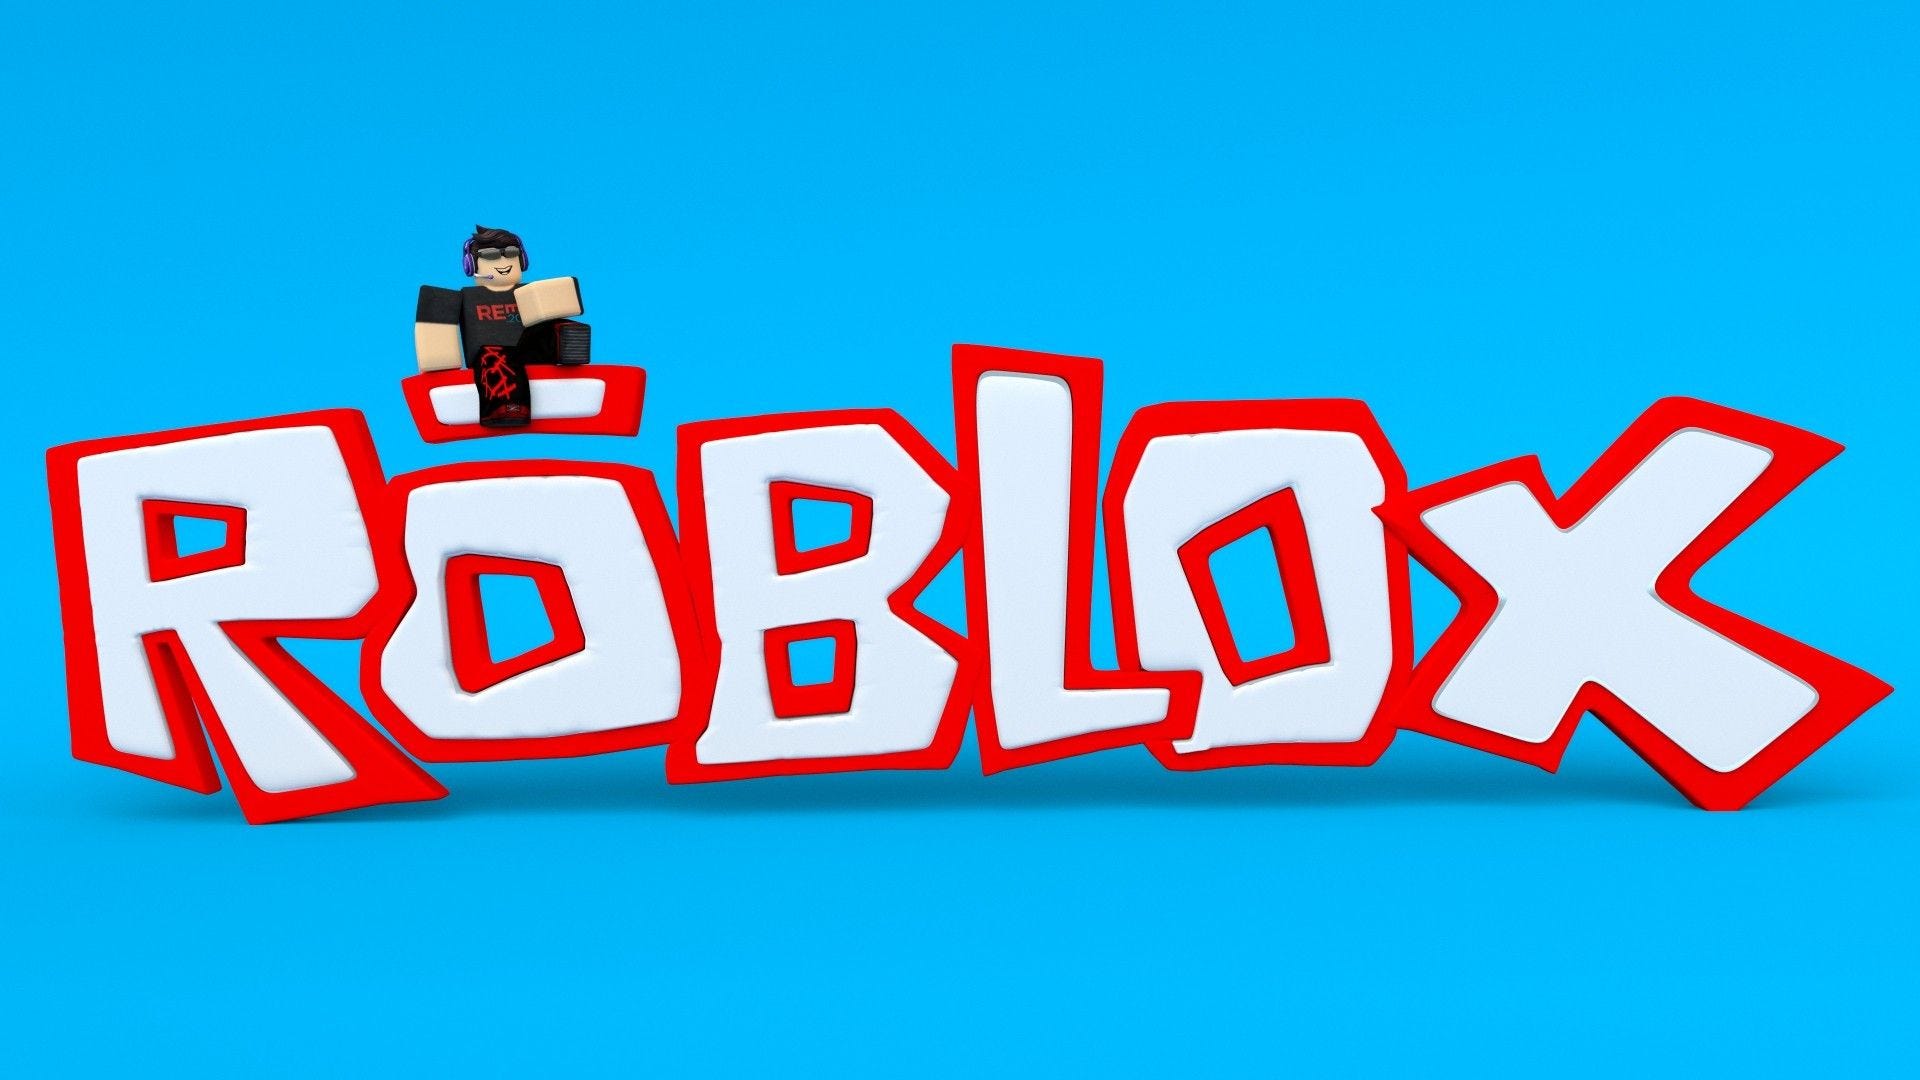 Roblox Free Robux Generator 2020 No Survey By Bennettcrane Sep 2020 Medium - how to get free robux with no generator